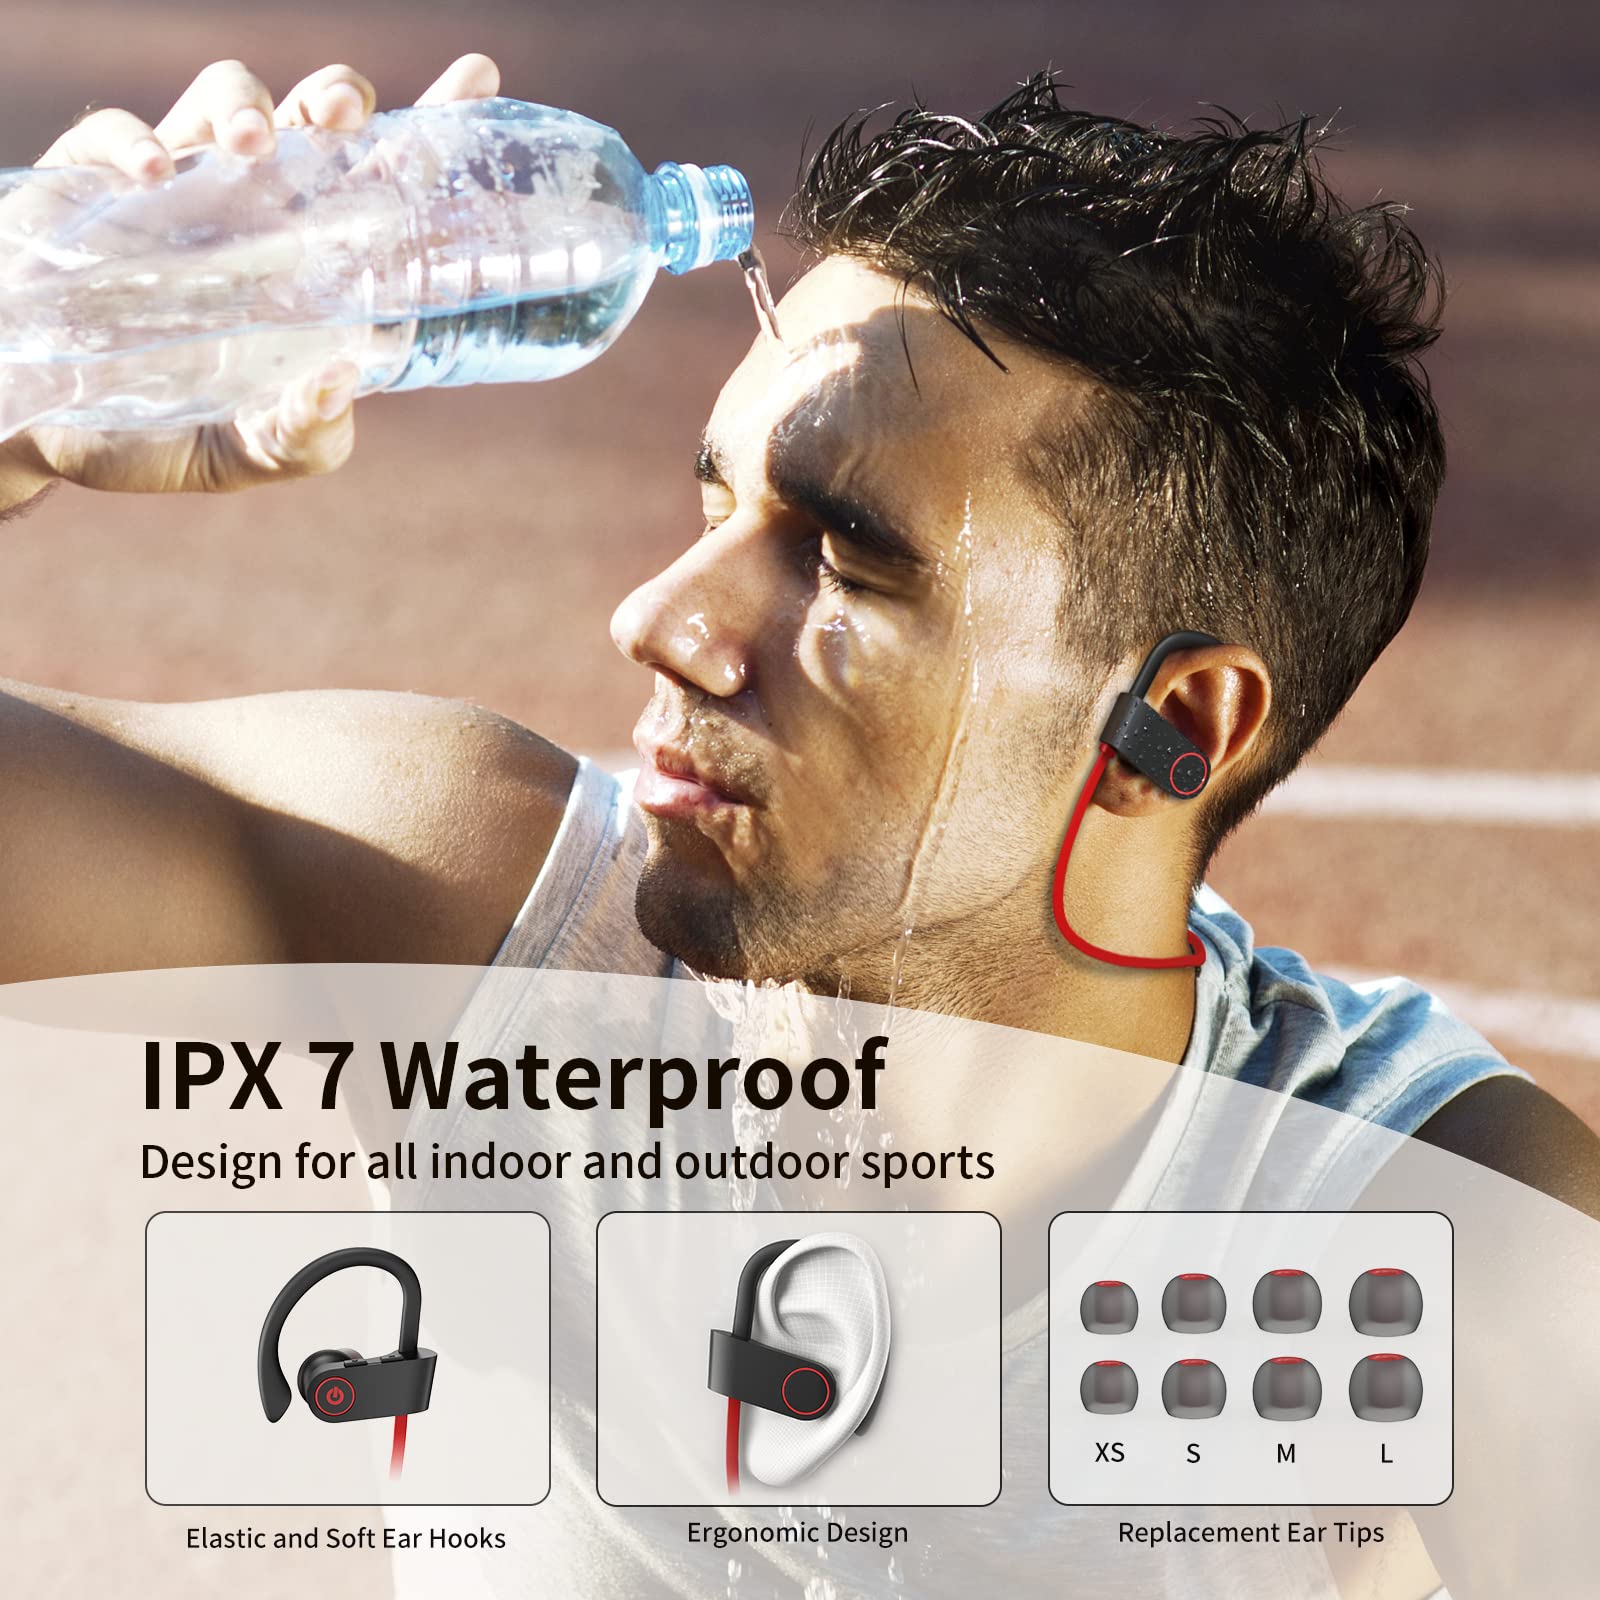 CXK Bluetooth Headphones Wireless Earbuds Bluetooth 5.3 Running Headphones with 15 Hours Playtime IPX7 Waterproof Earphones for Sports and Workout